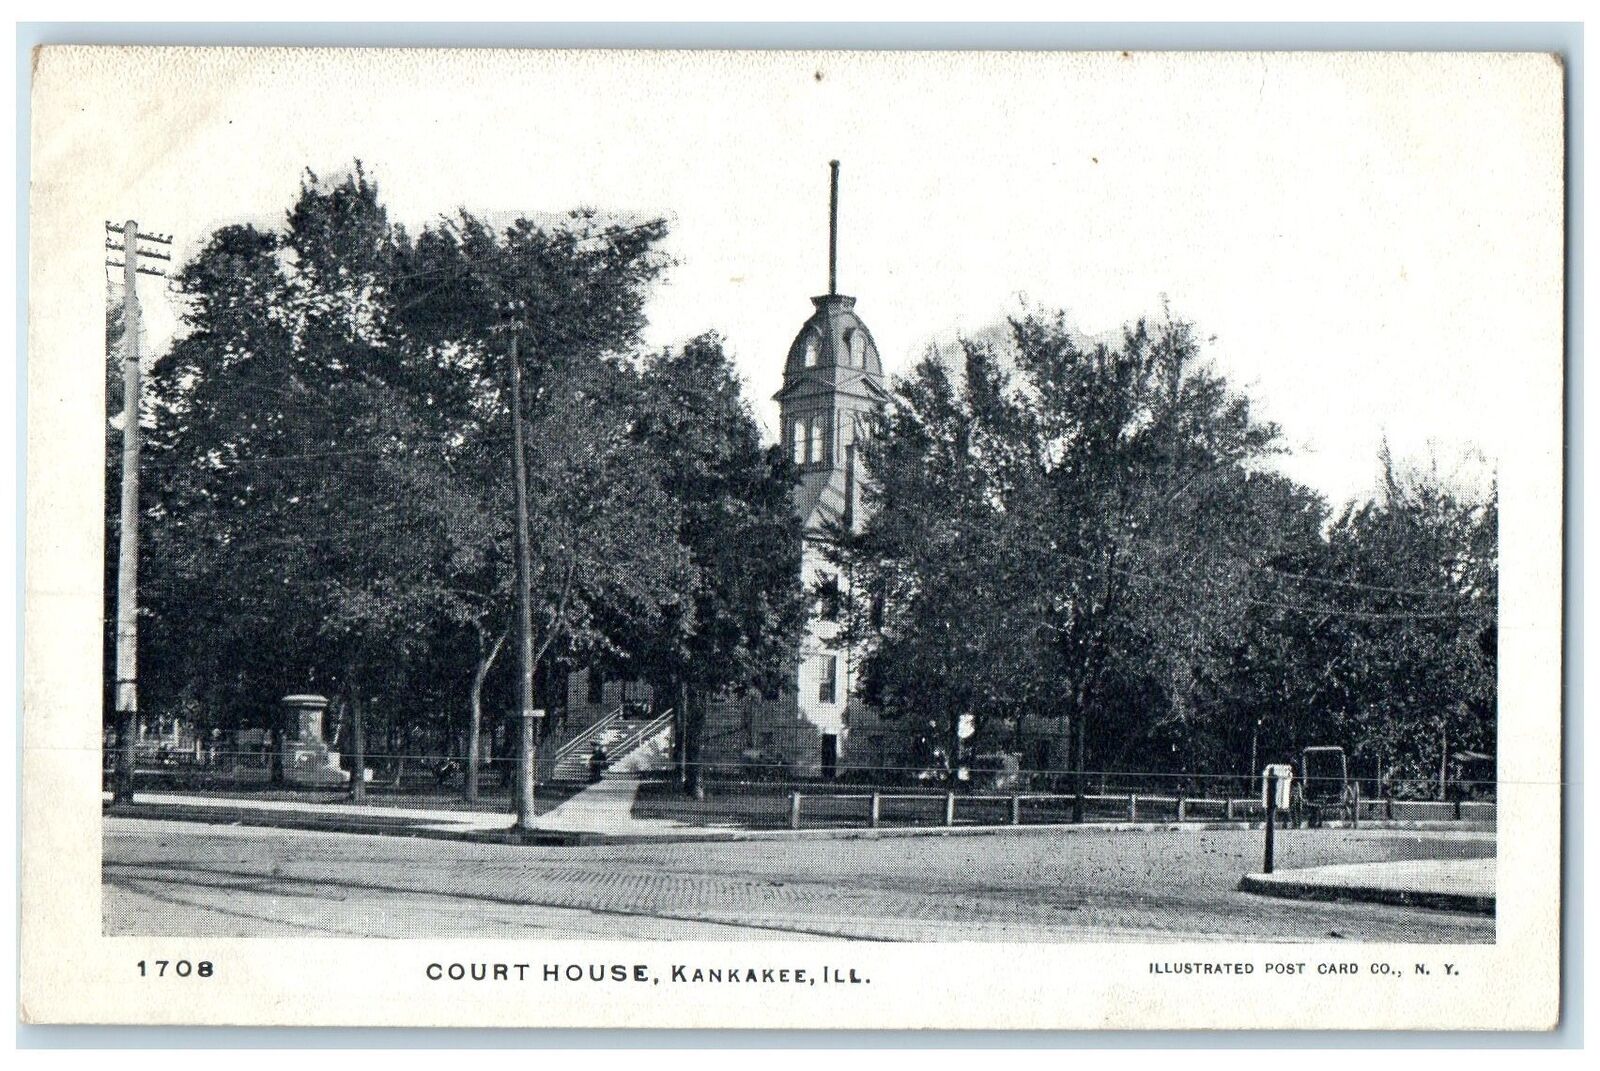 c1905 Court House Building Tower Stairs Entrance Kankakee Illinois IL Postcard